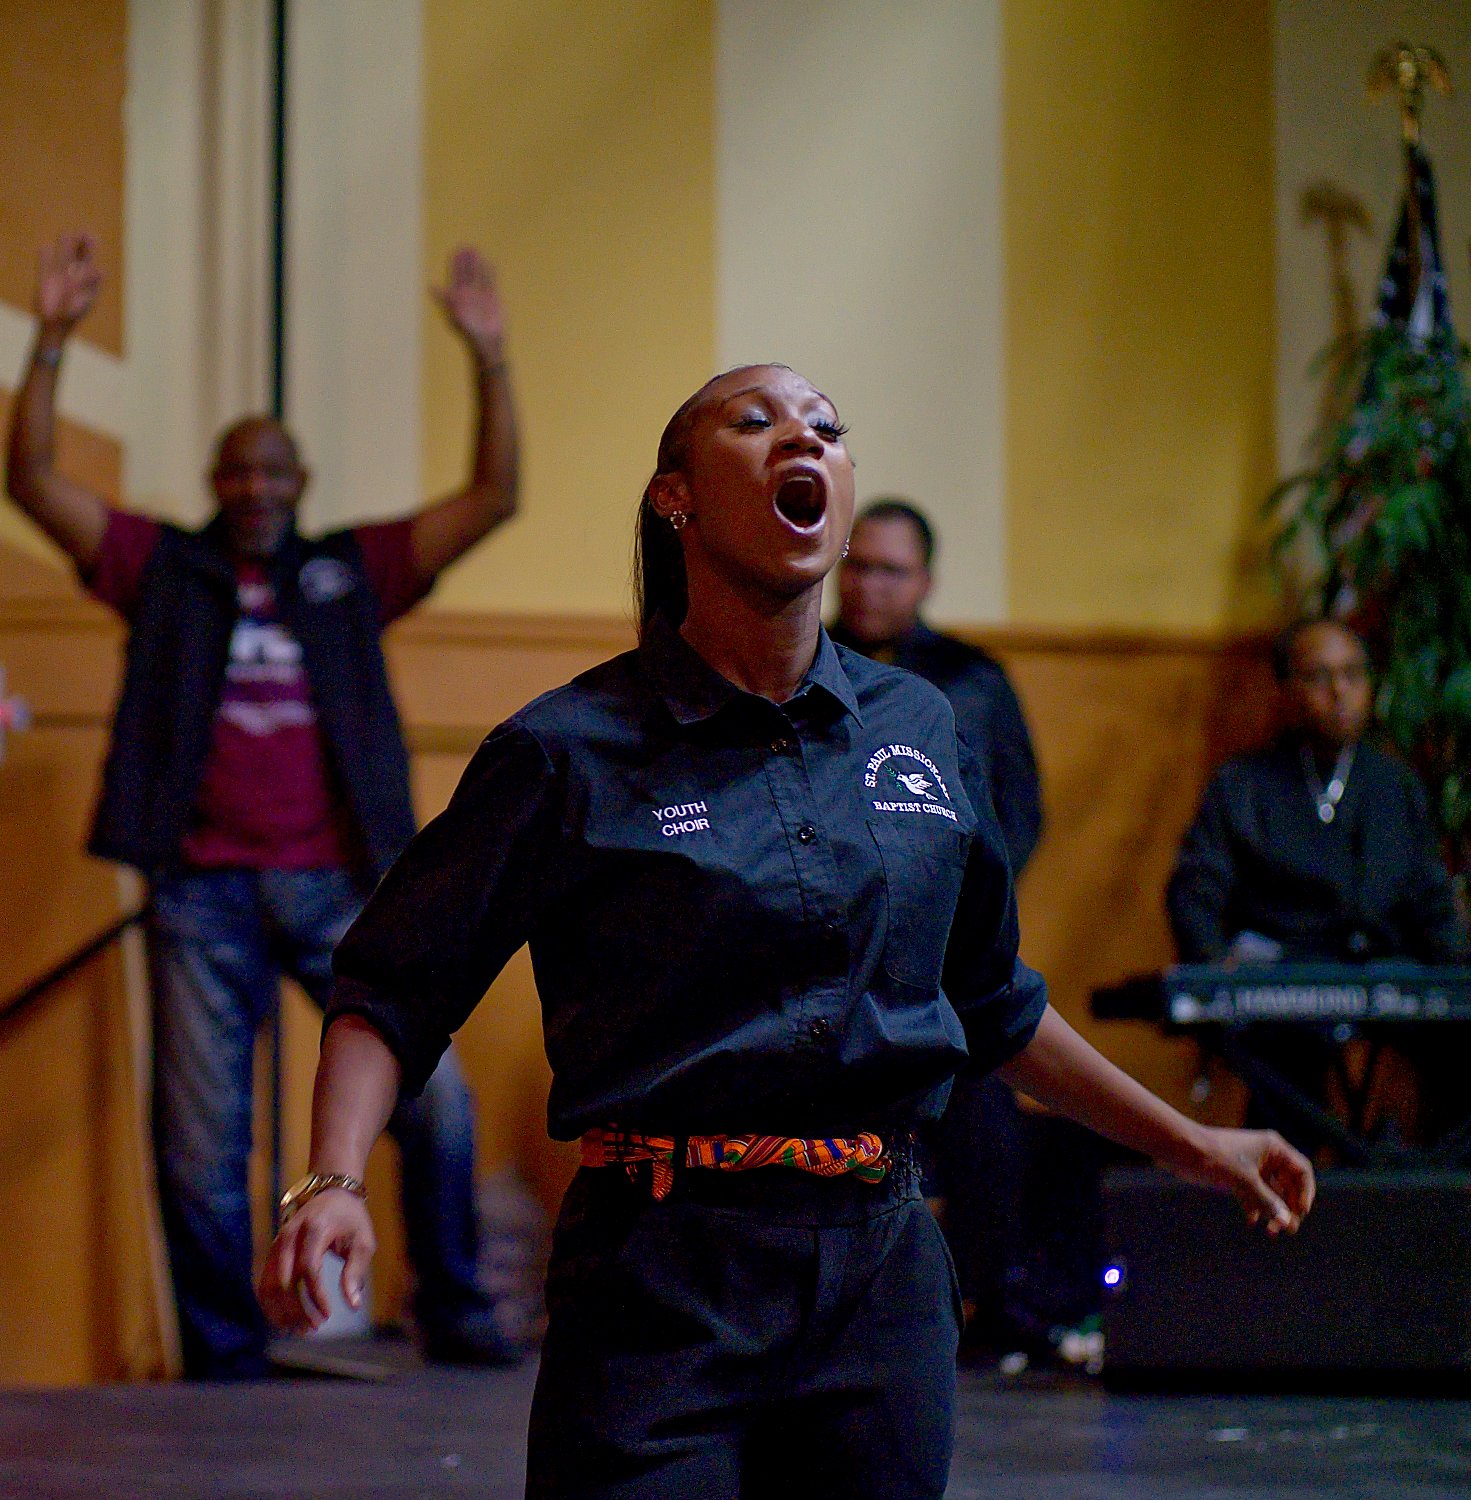 The youth of St. Paul's do not lack talented leadership, as demonstrated by the vocal and rhythm guidance provided by director Chasey Shepard; nor passion, as shown by she and Pastor Demethrius Boyd (left). [view more voices]